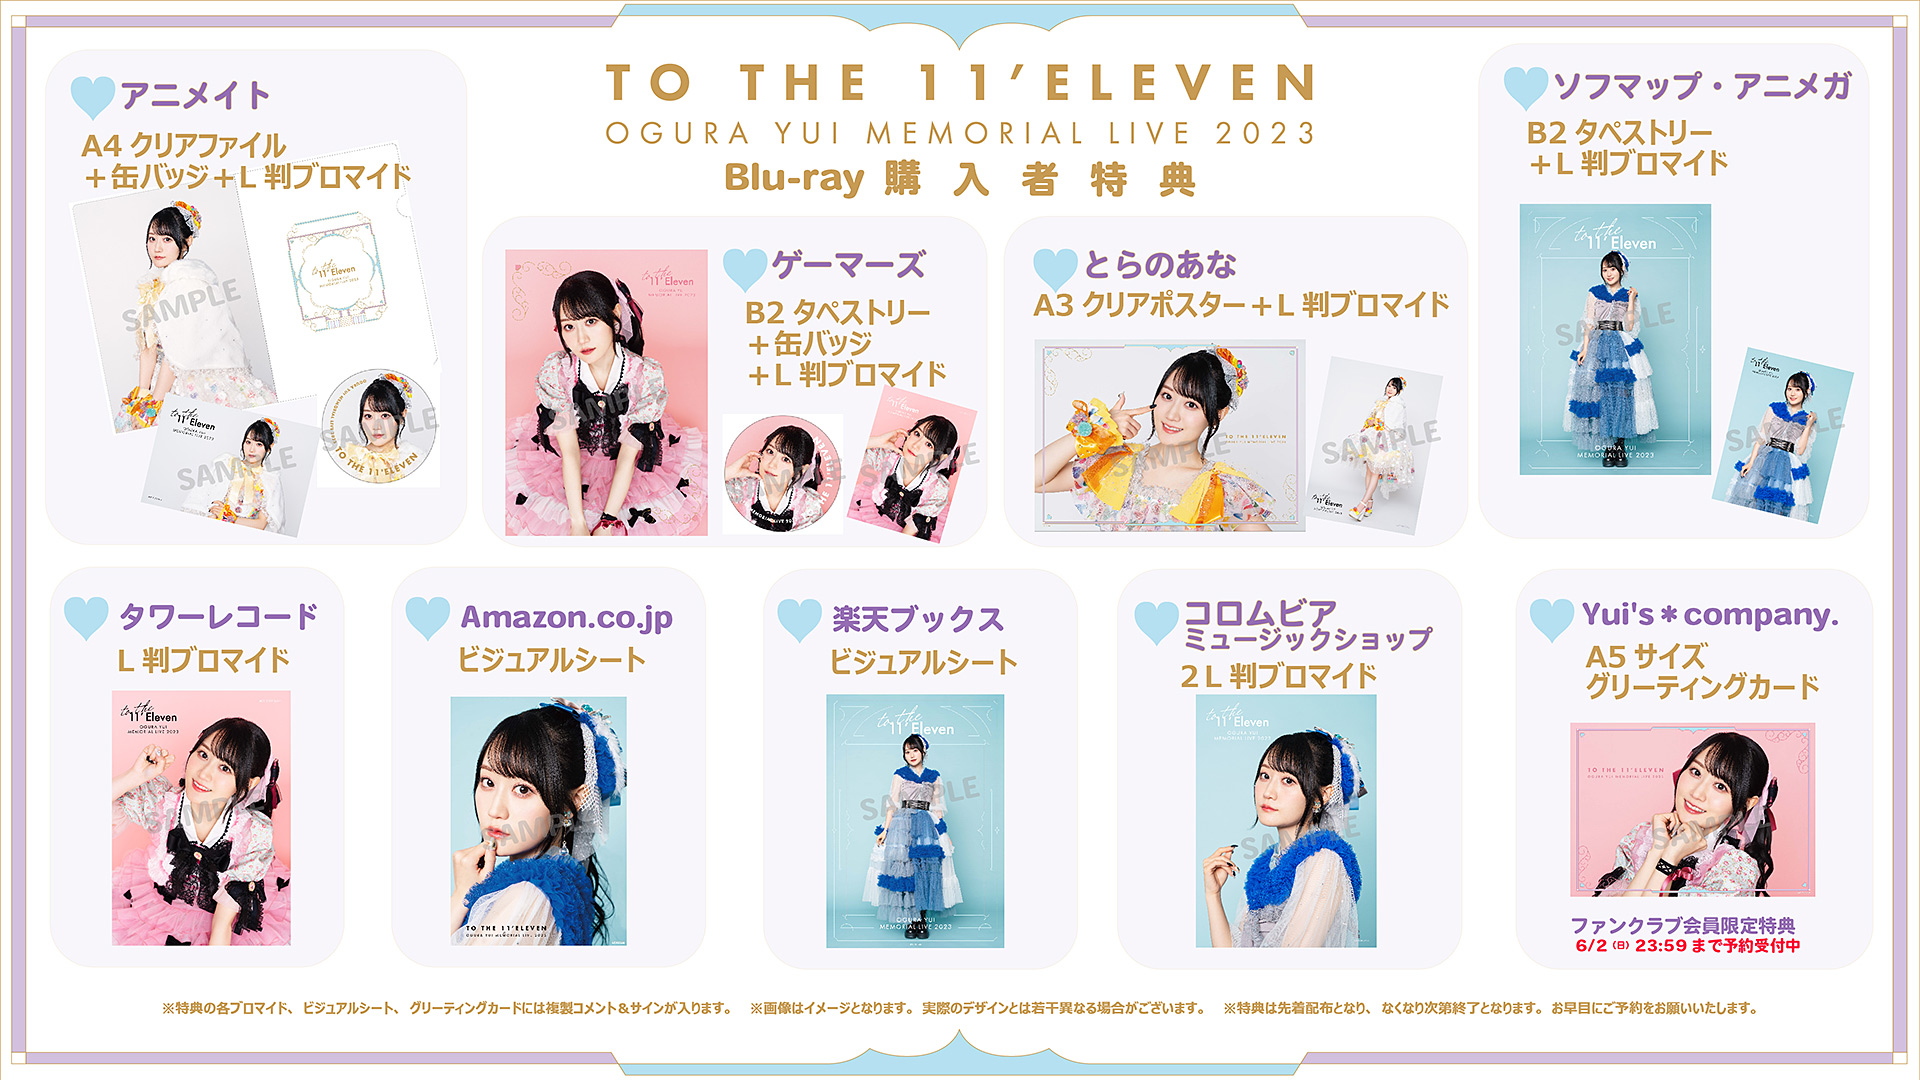 LIVE Blu-ray「小倉 唯 Memorial LIVE 2023〜To the 11'Eleven〜 Blu 